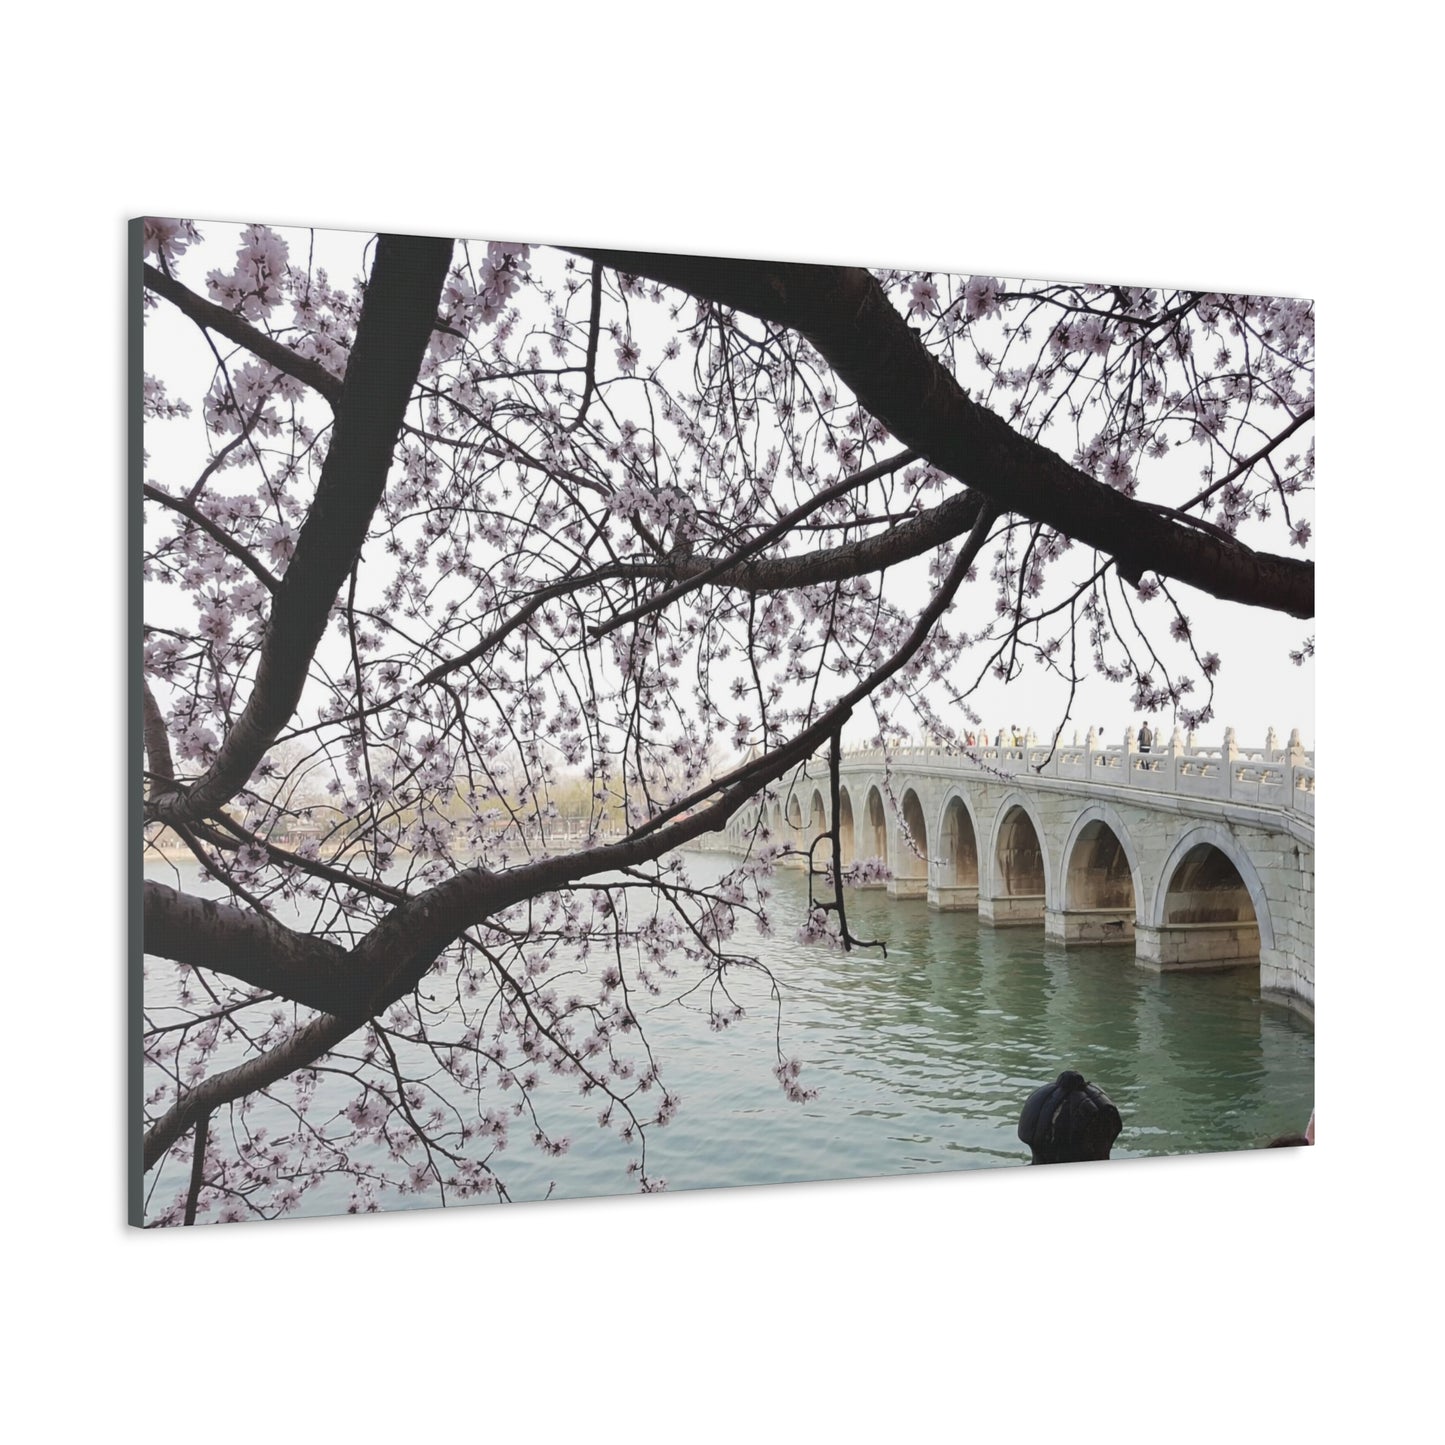 China-7 Canvas Gallery Wraps